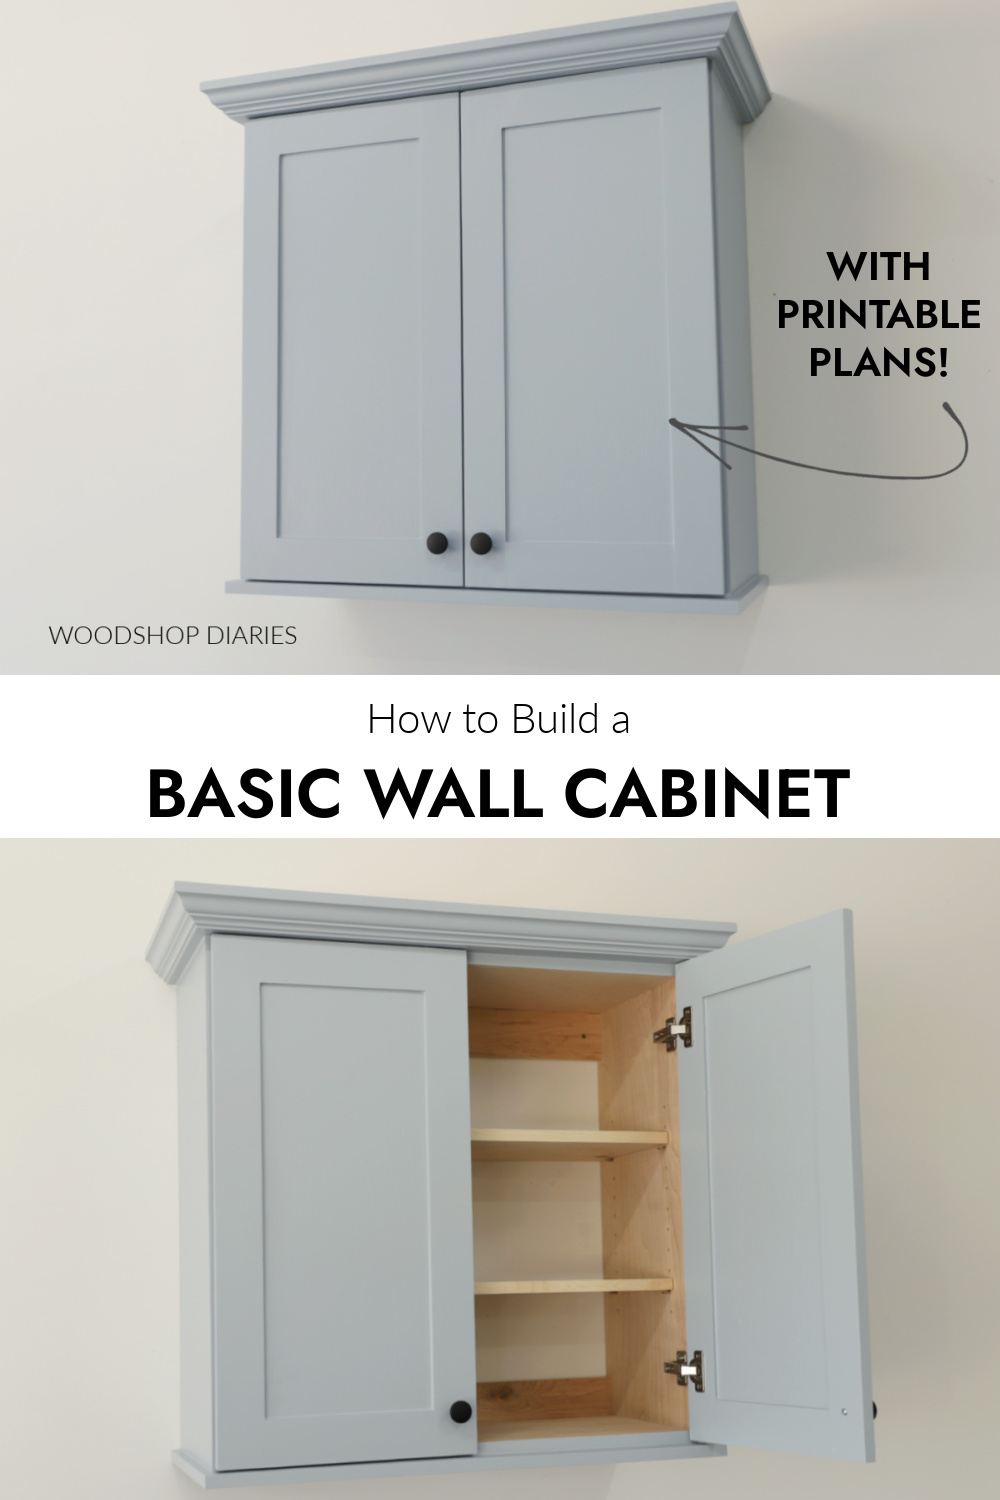 Pinterest collage image showing closed door wall cabinet at top and open door cabinet at bottom with text "how to build a basic wall cabinet"